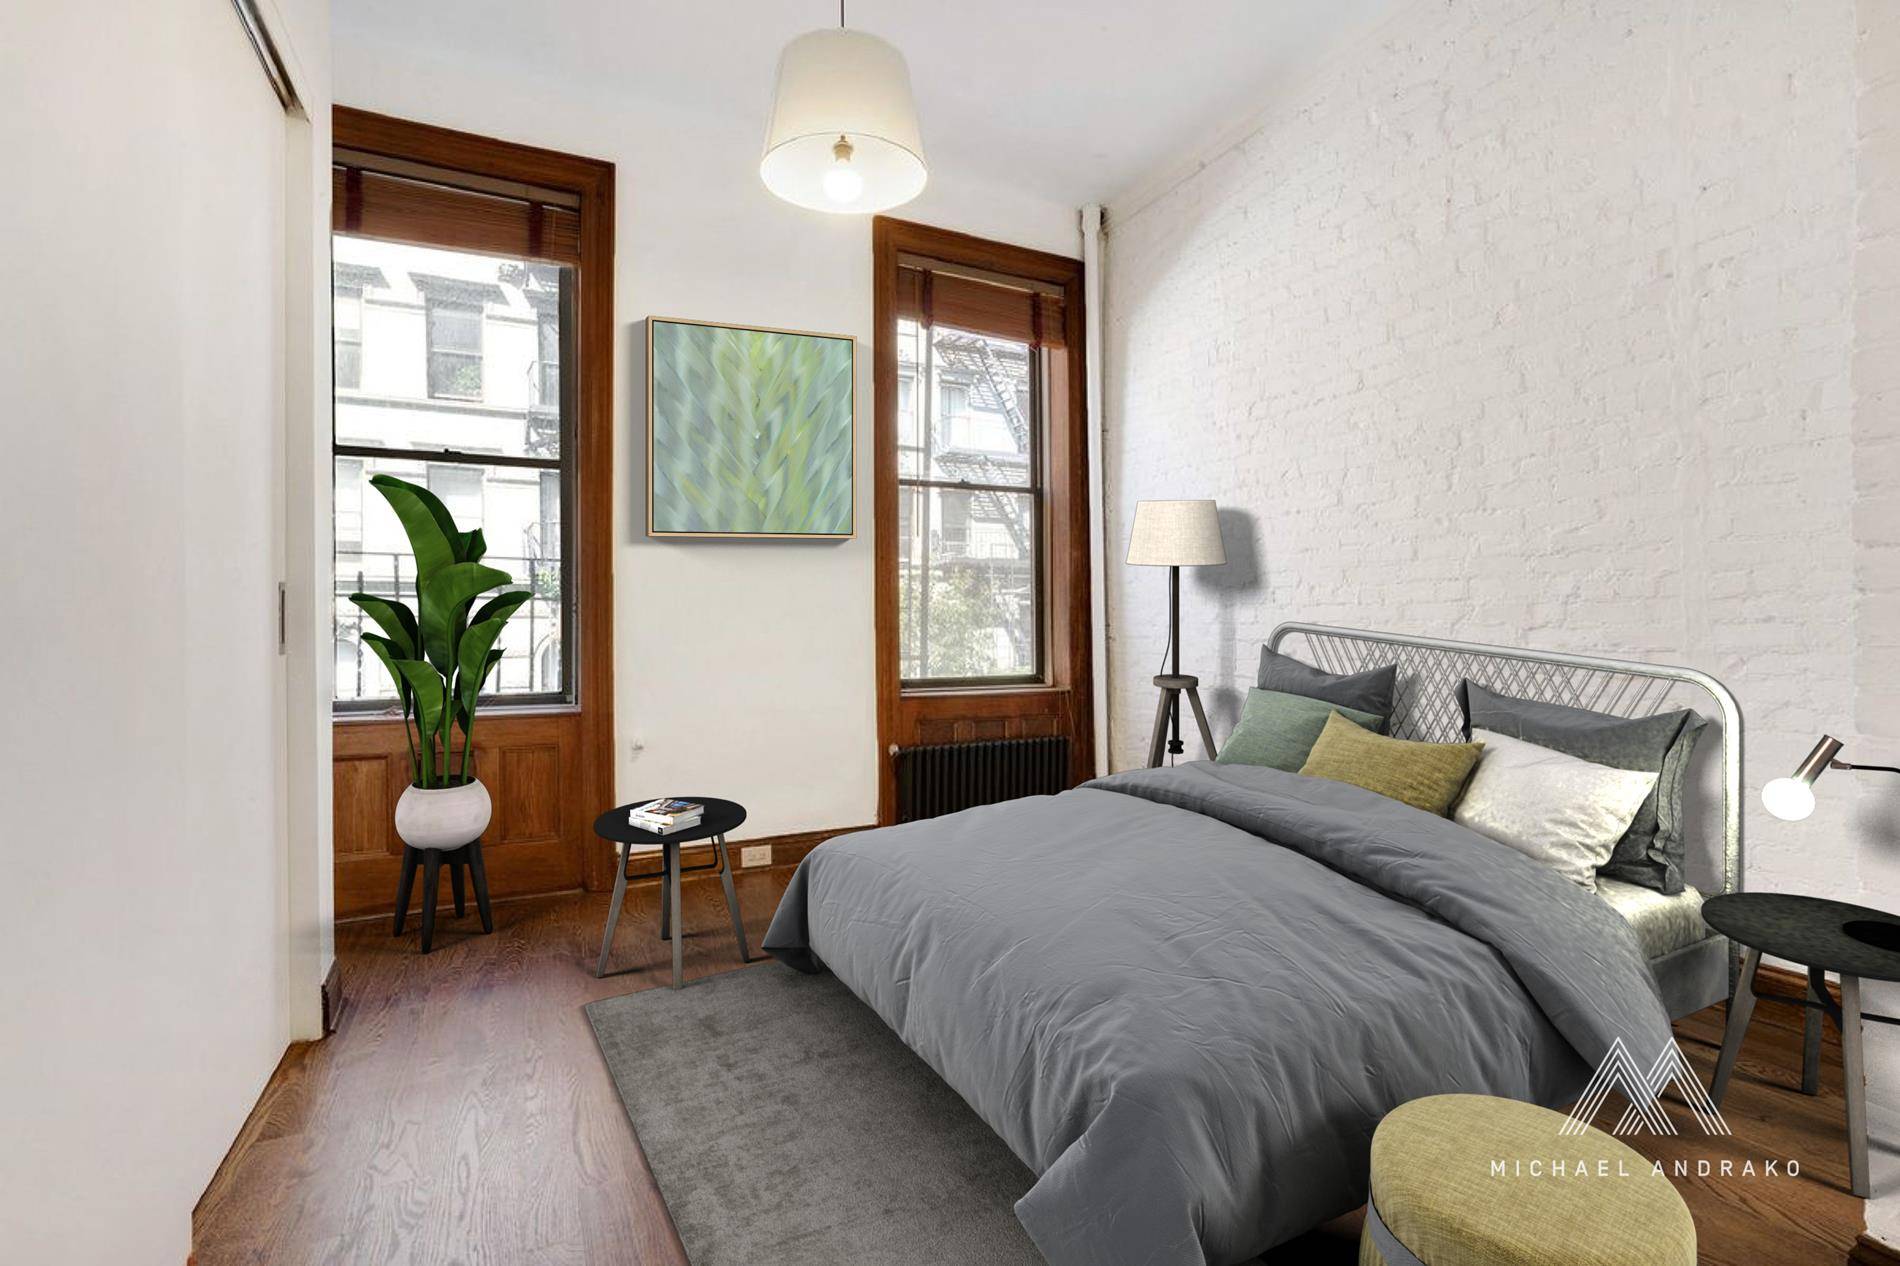 NEW TO THE MARKET PRIME EAST VILLAGECharming One Bedroom, One Bath SubletLive in style on a beautiful tree lined street in one of Manhattan s most sought after neighborhoods.